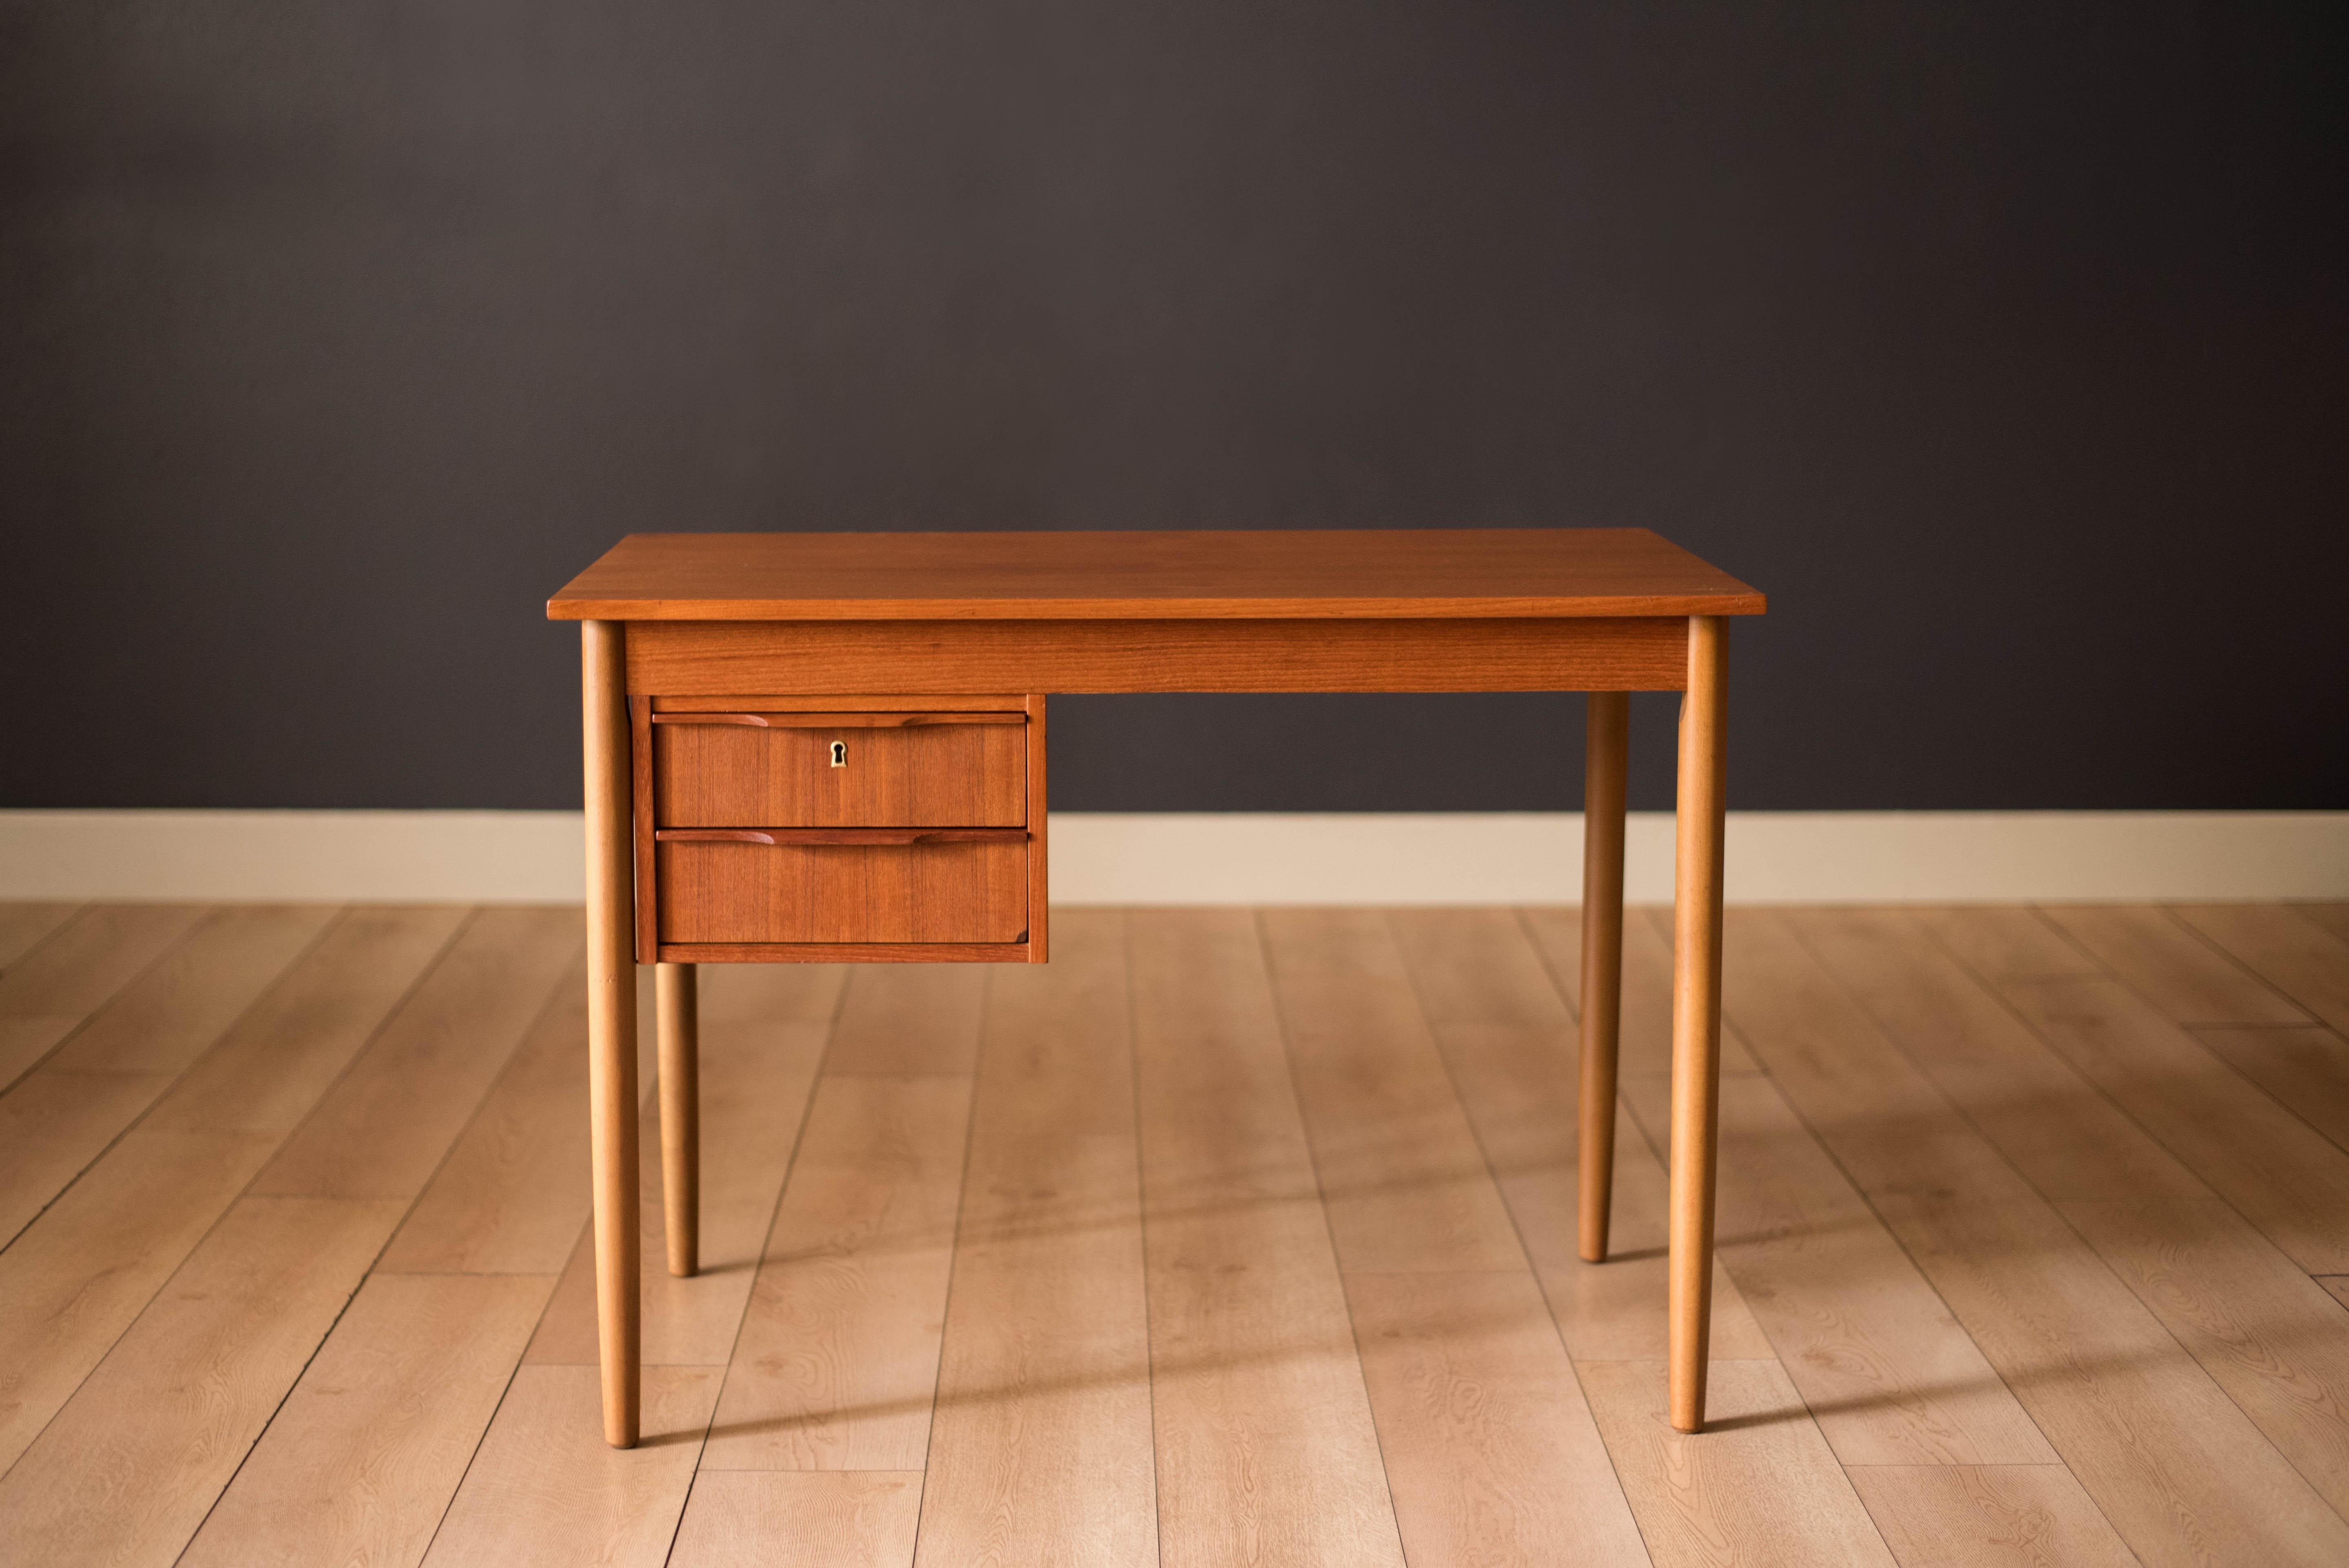 Mid-Century Modern compact writing desk in teak and birch manufactured by Ejsing Møbelfabrik, Denmark. This contrasting piece includes two dovetailed drawers with sculpted handles and tapered pencil legs. The perfect fit for small spaces and can be